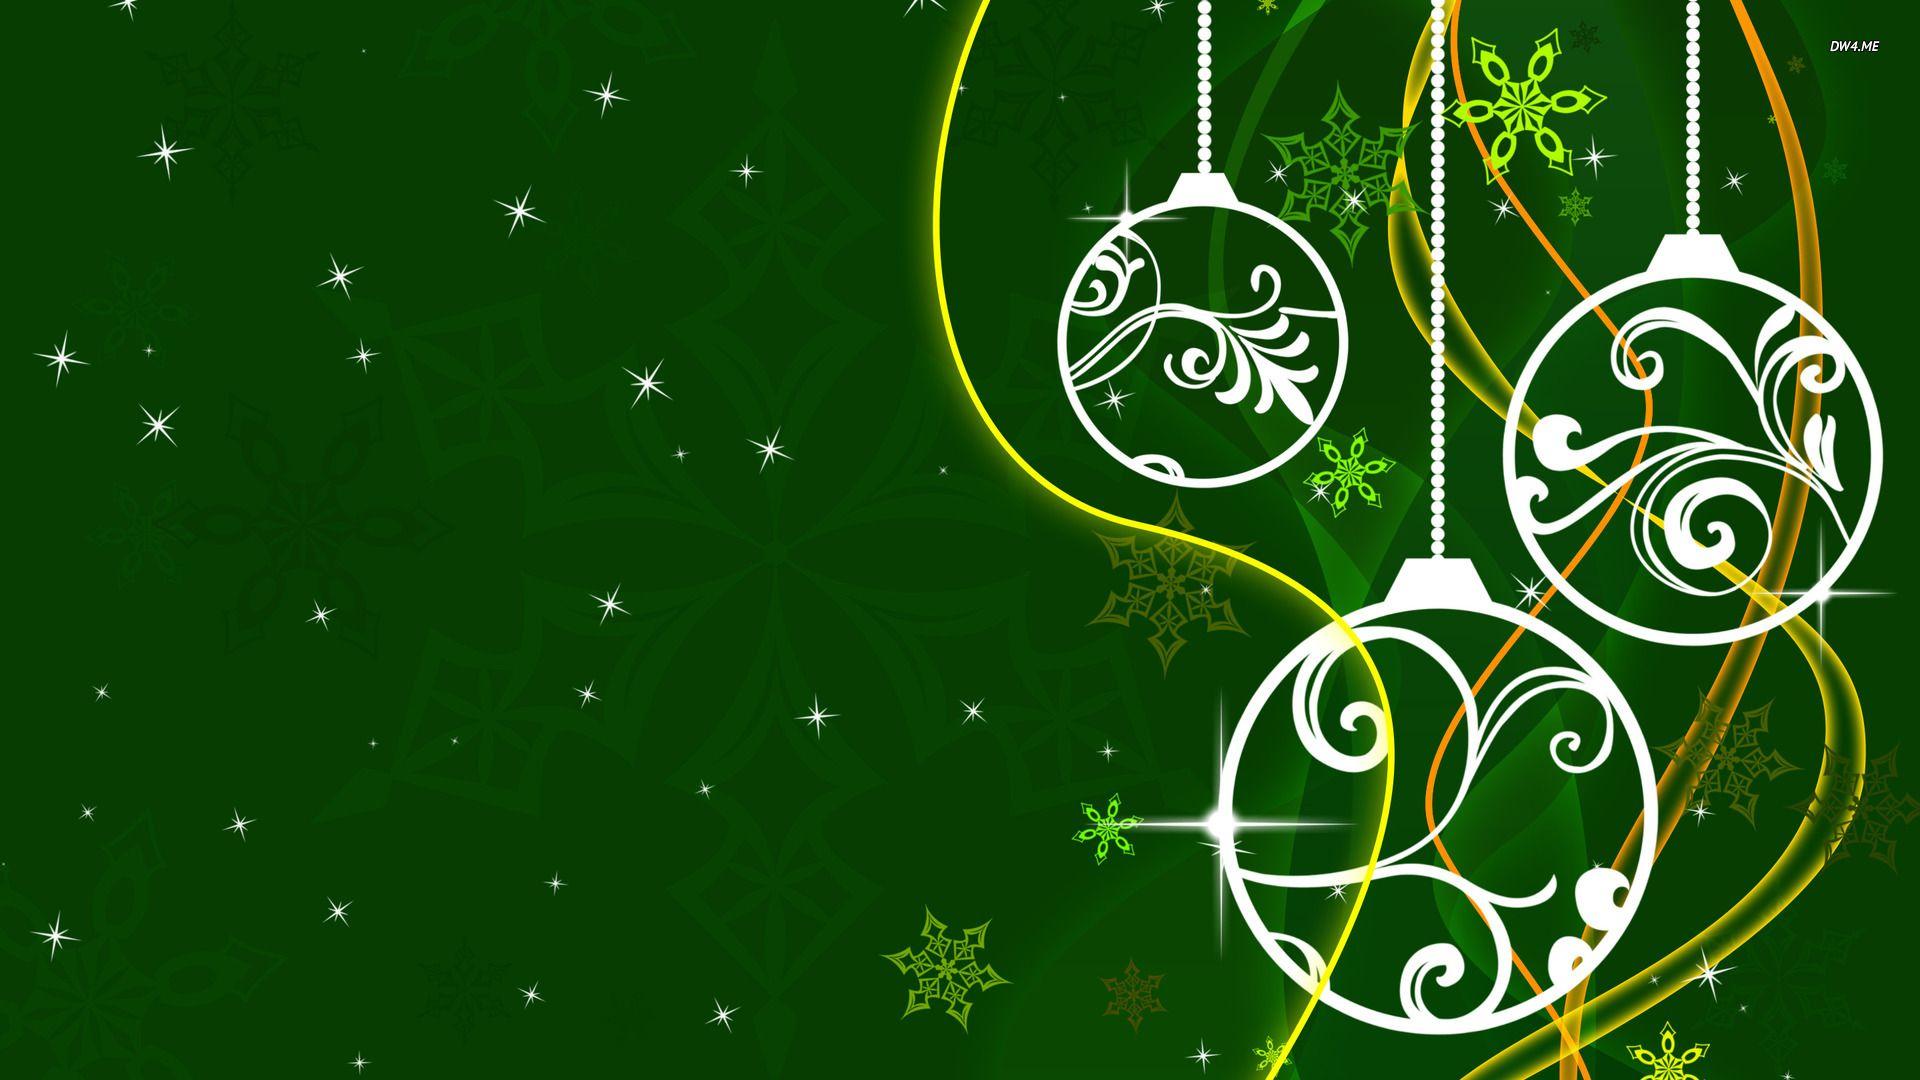 Download Organic Green Christmas Background 5445. Best Collections